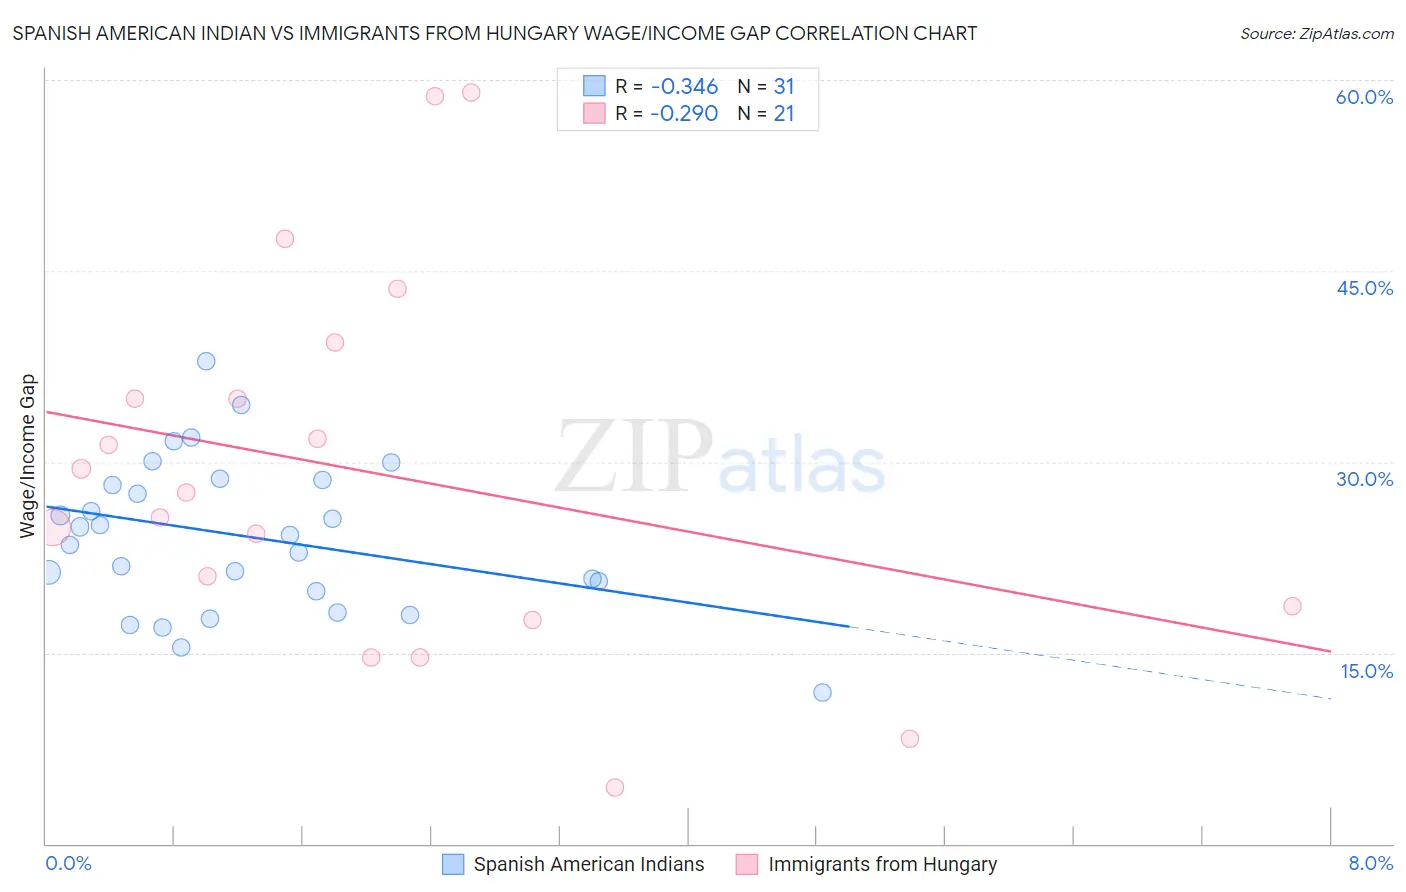 Spanish American Indian vs Immigrants from Hungary Wage/Income Gap